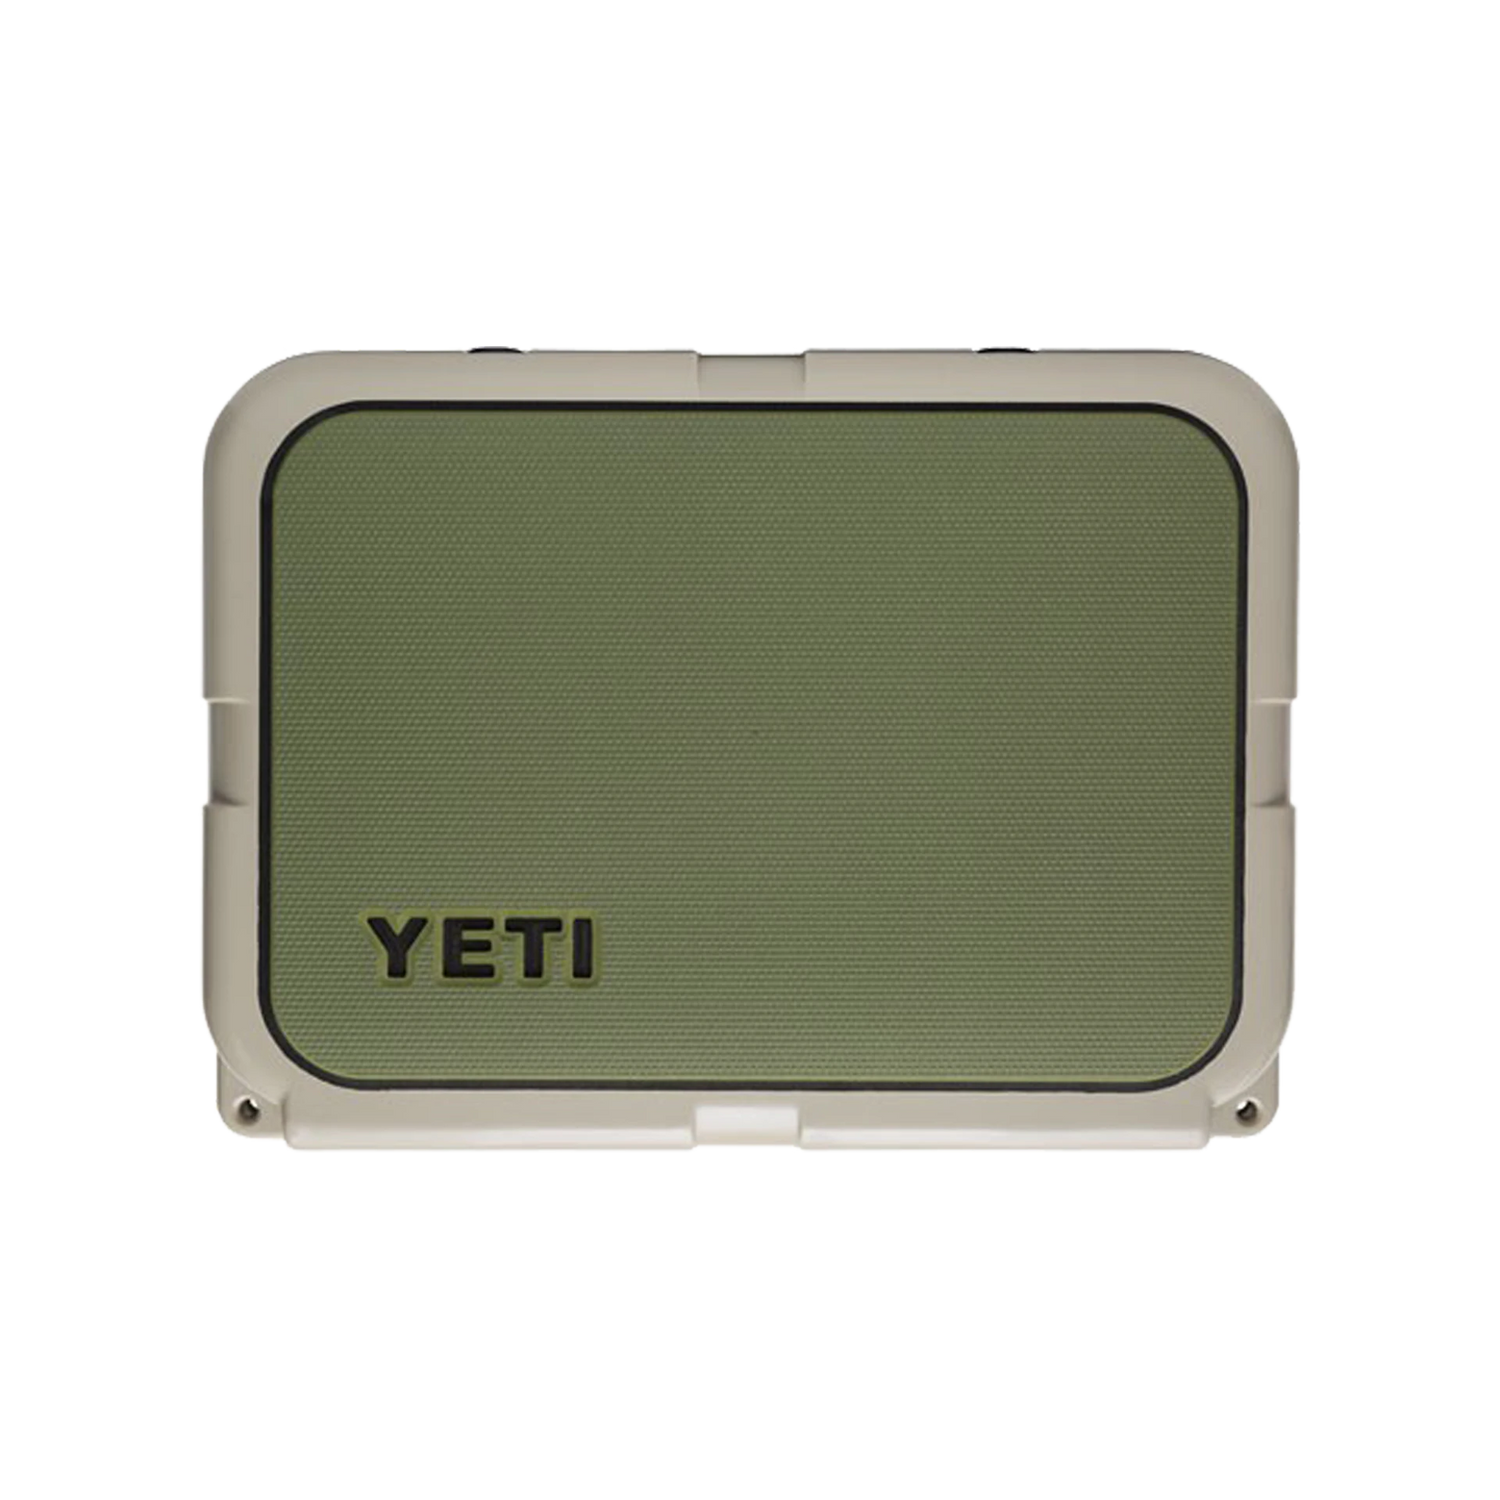 YETI Hard Cooler Traction Pad - Olive Green Olive Green